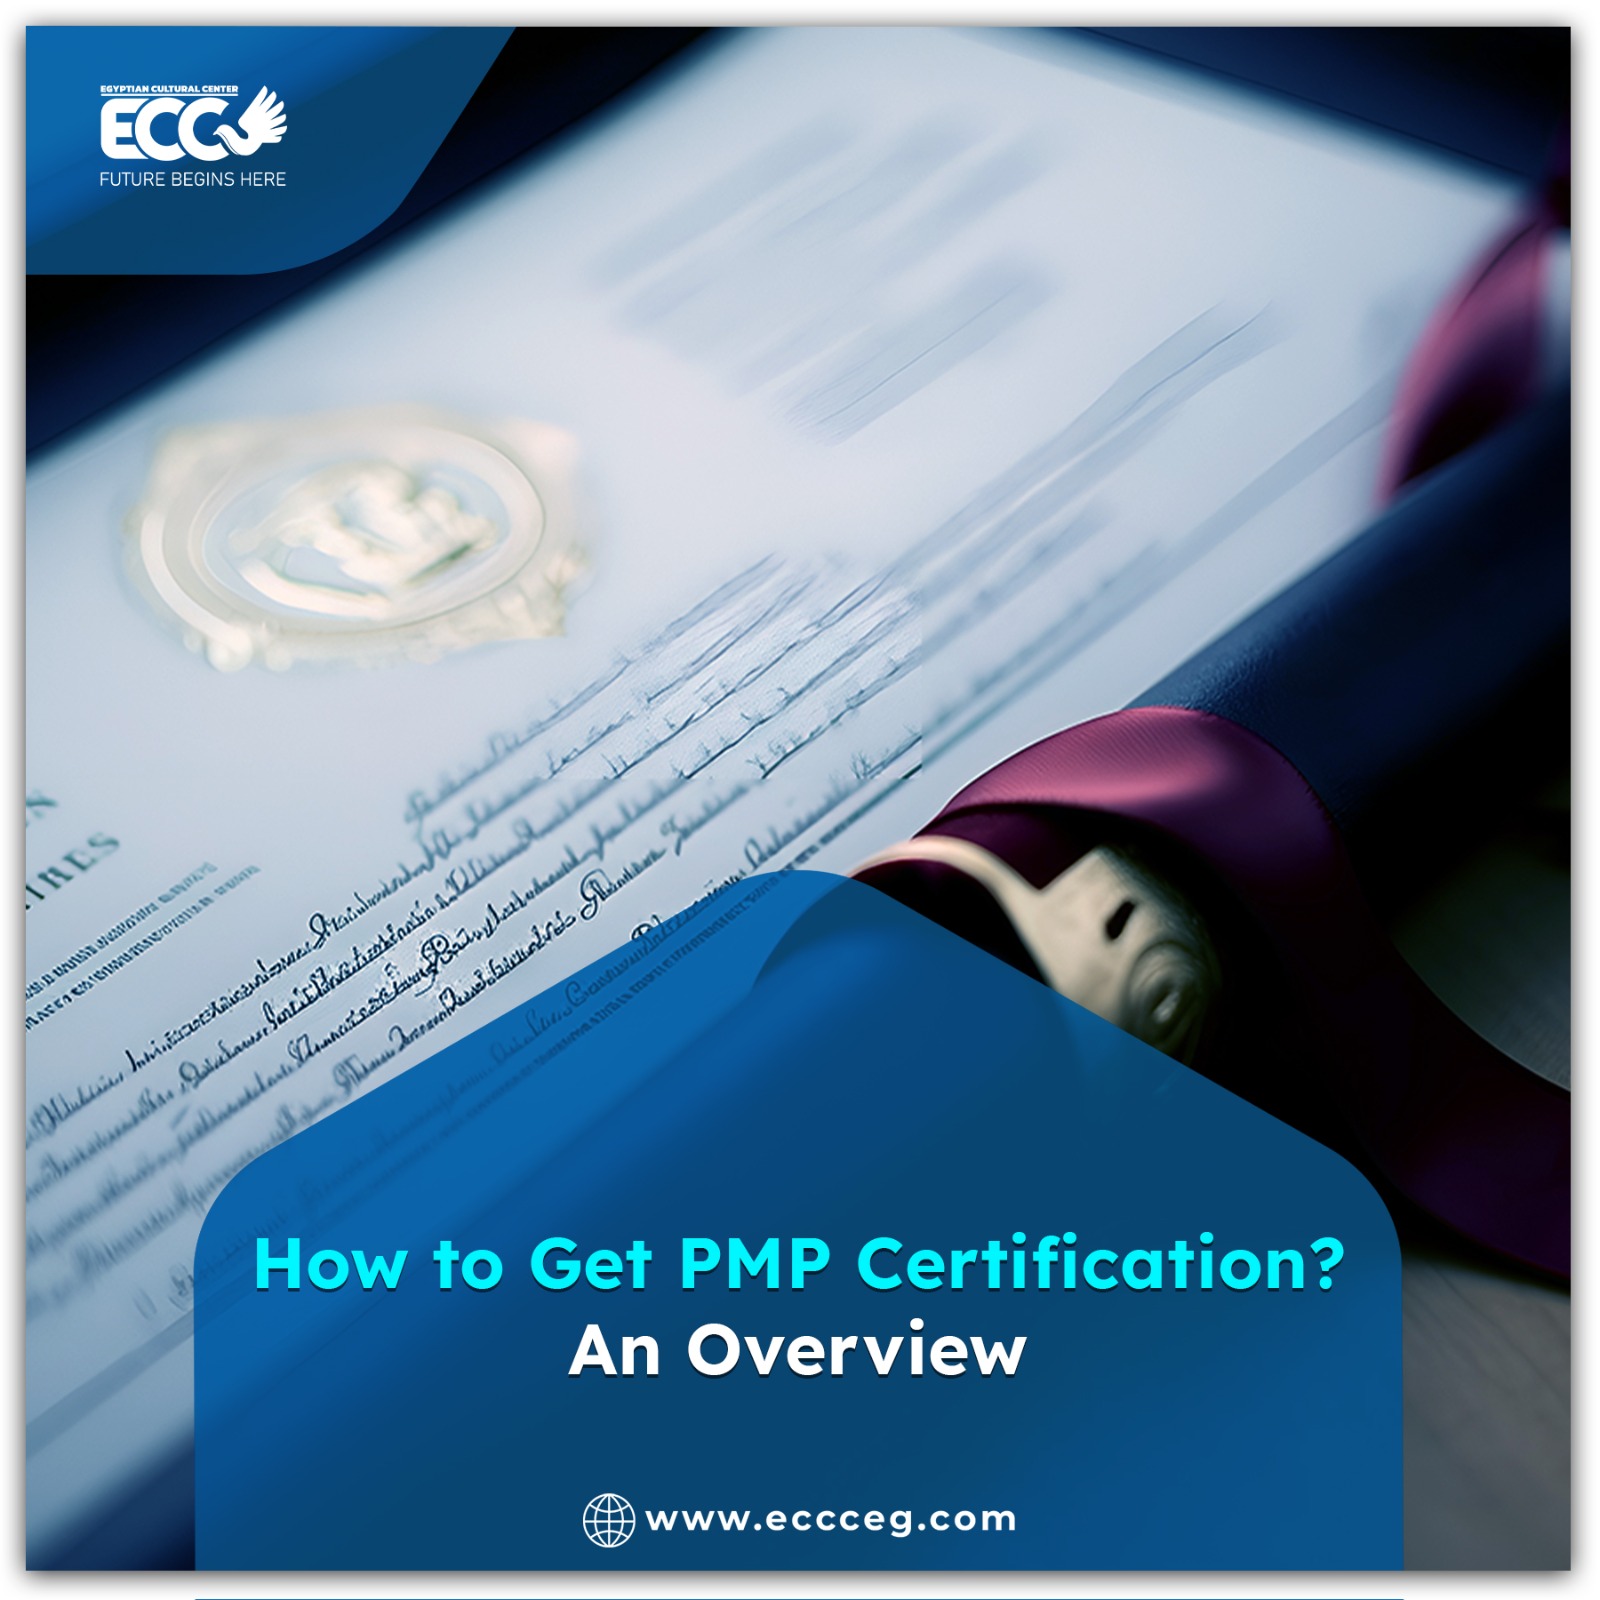 How to Get a PMP Certification: An Overview